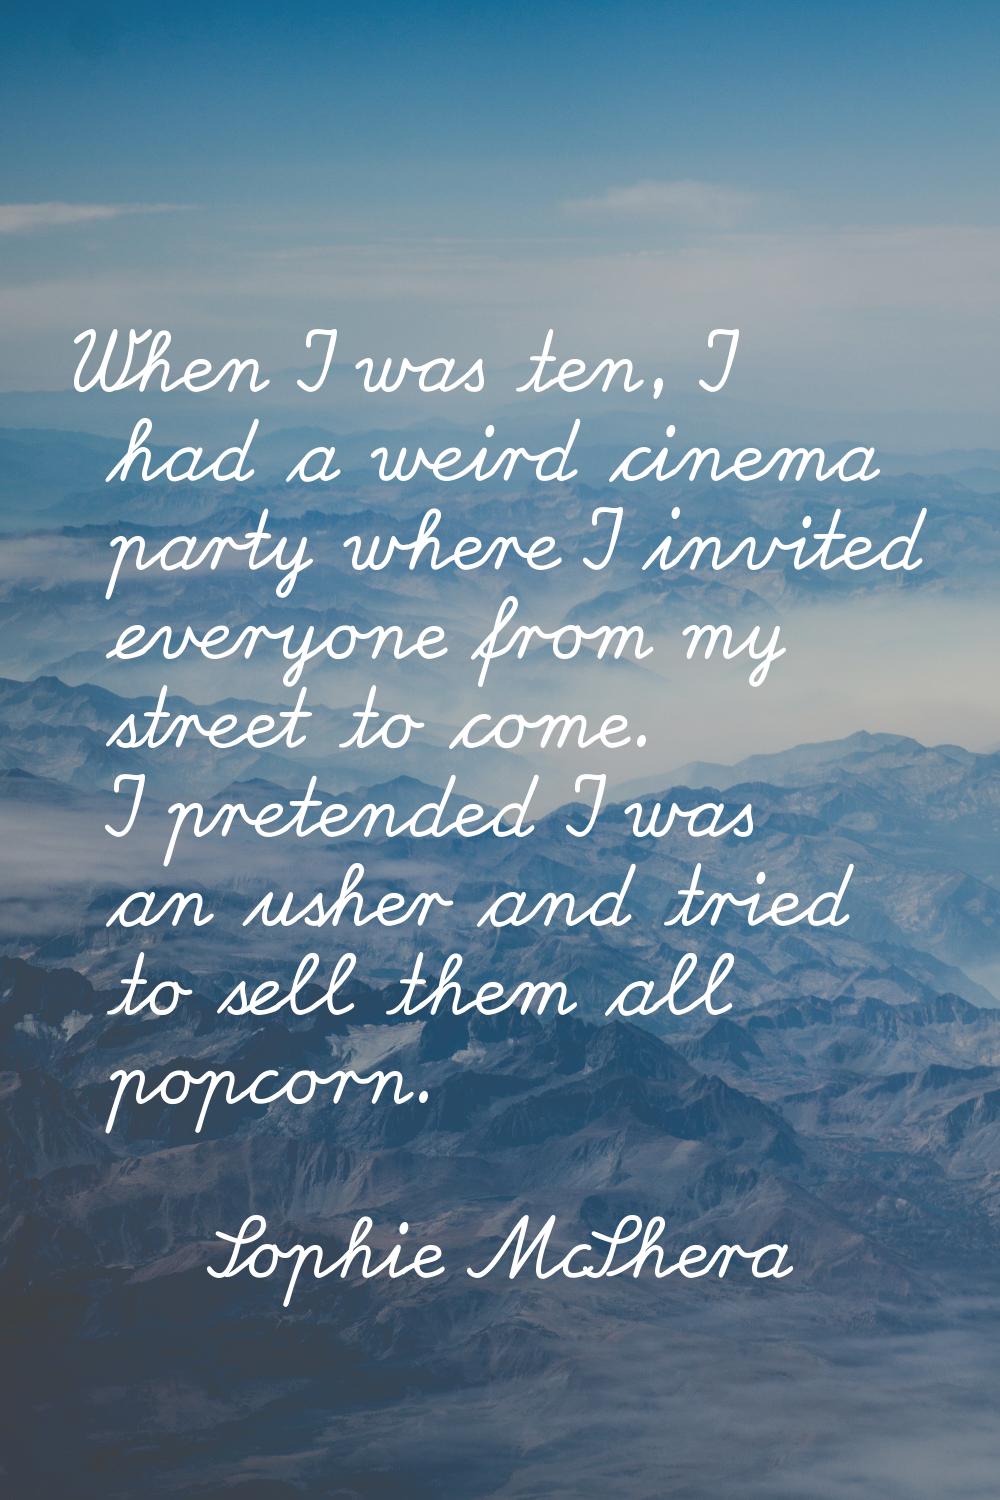 When I was ten, I had a weird cinema party where I invited everyone from my street to come. I prete